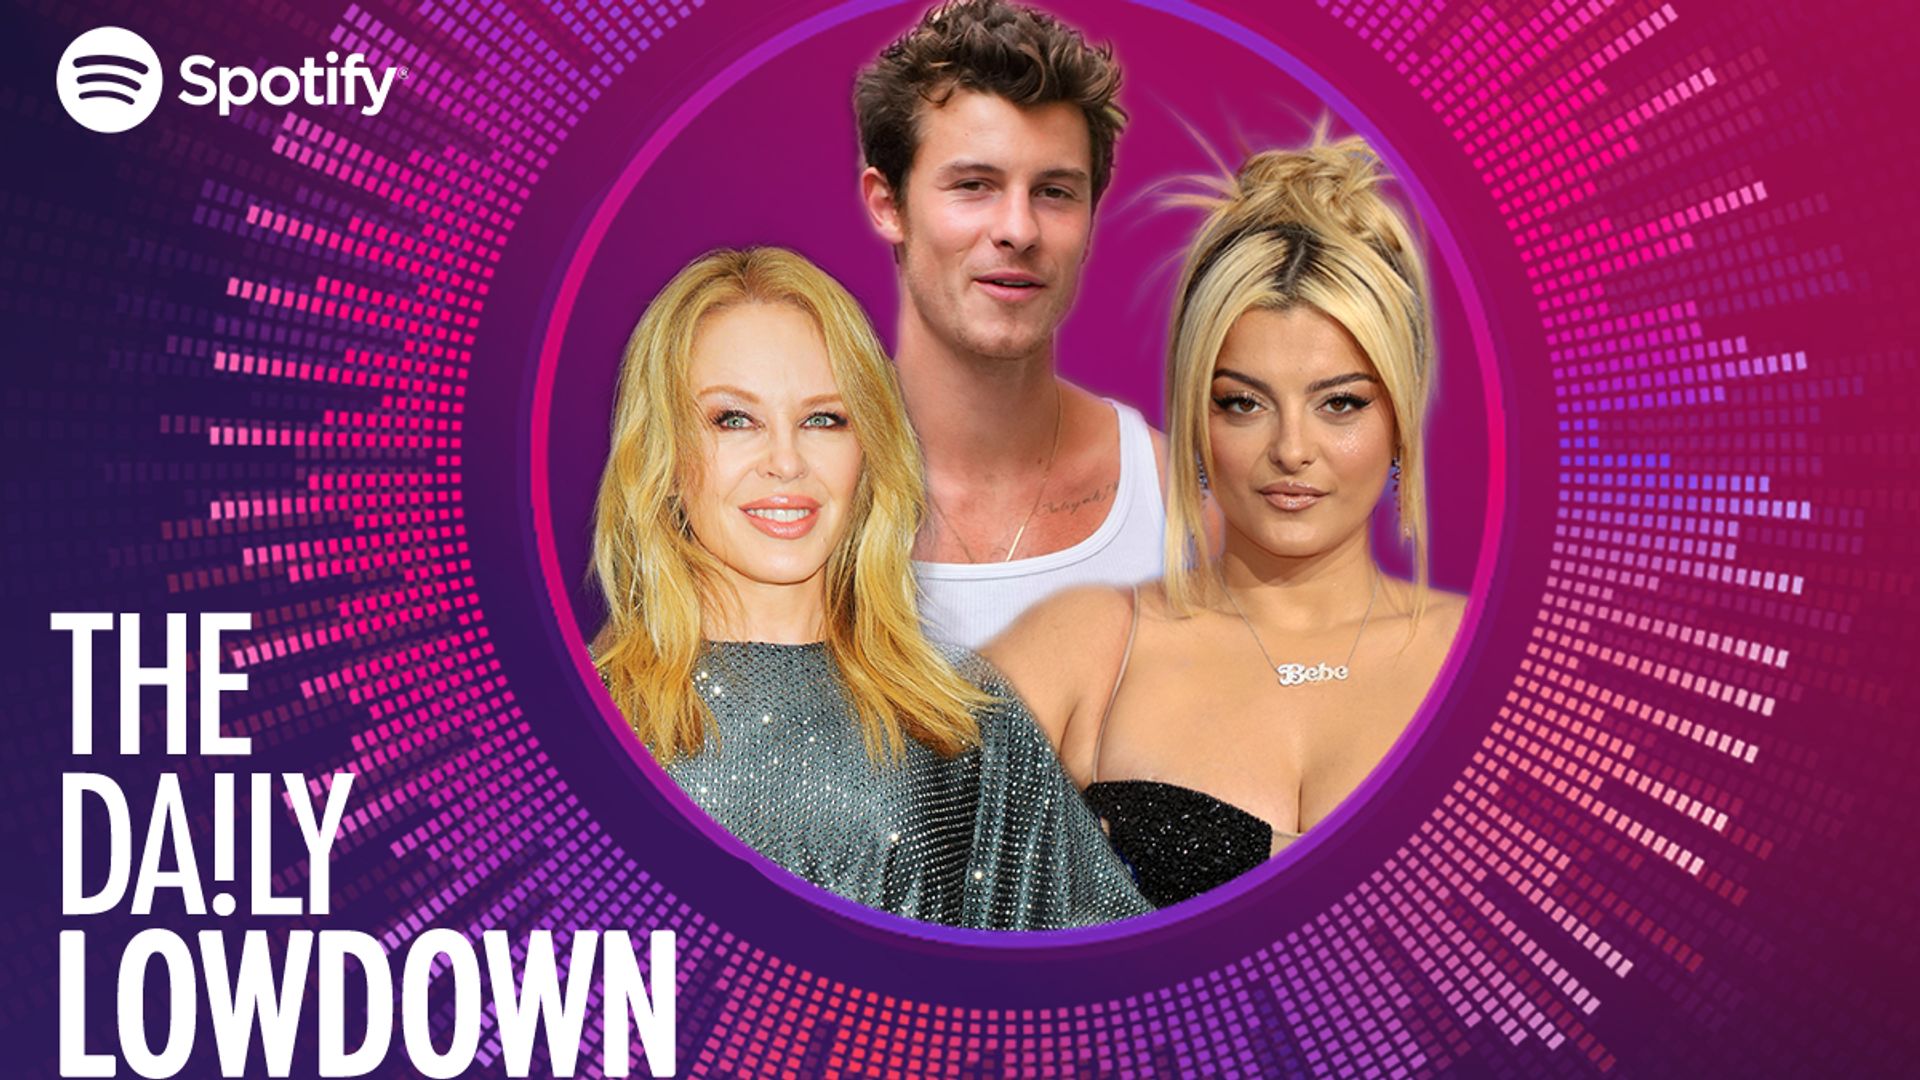 Kylie Minogue, Shawn Mendes and Bebe Rexha daily lowdown